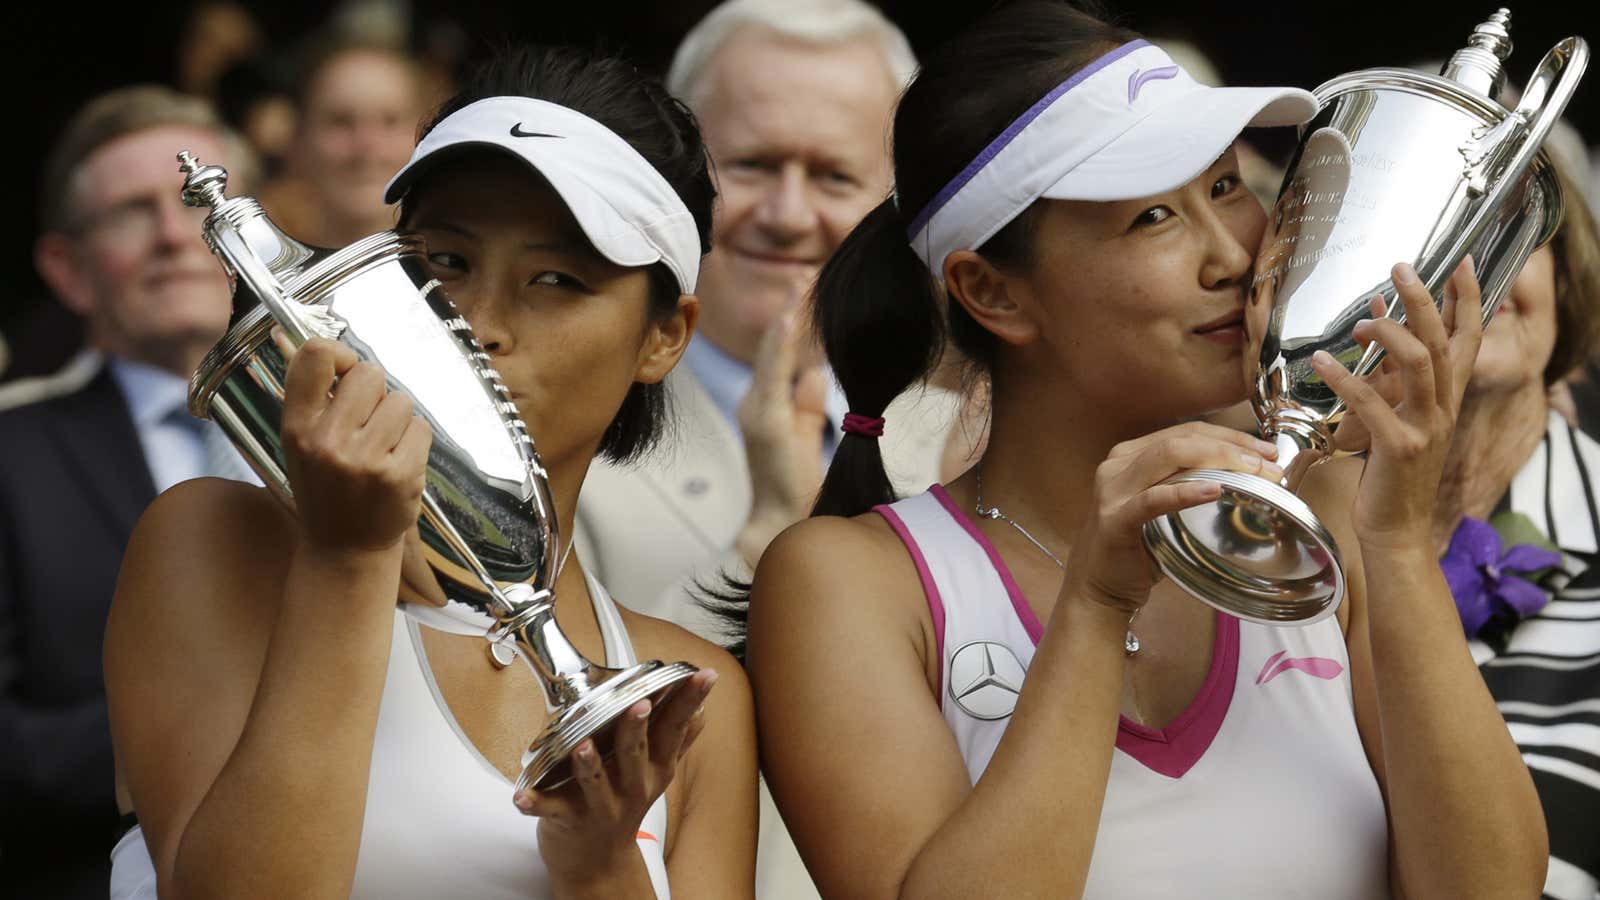 Hsieh Su-wei on the left, Peng Shuai on the right.